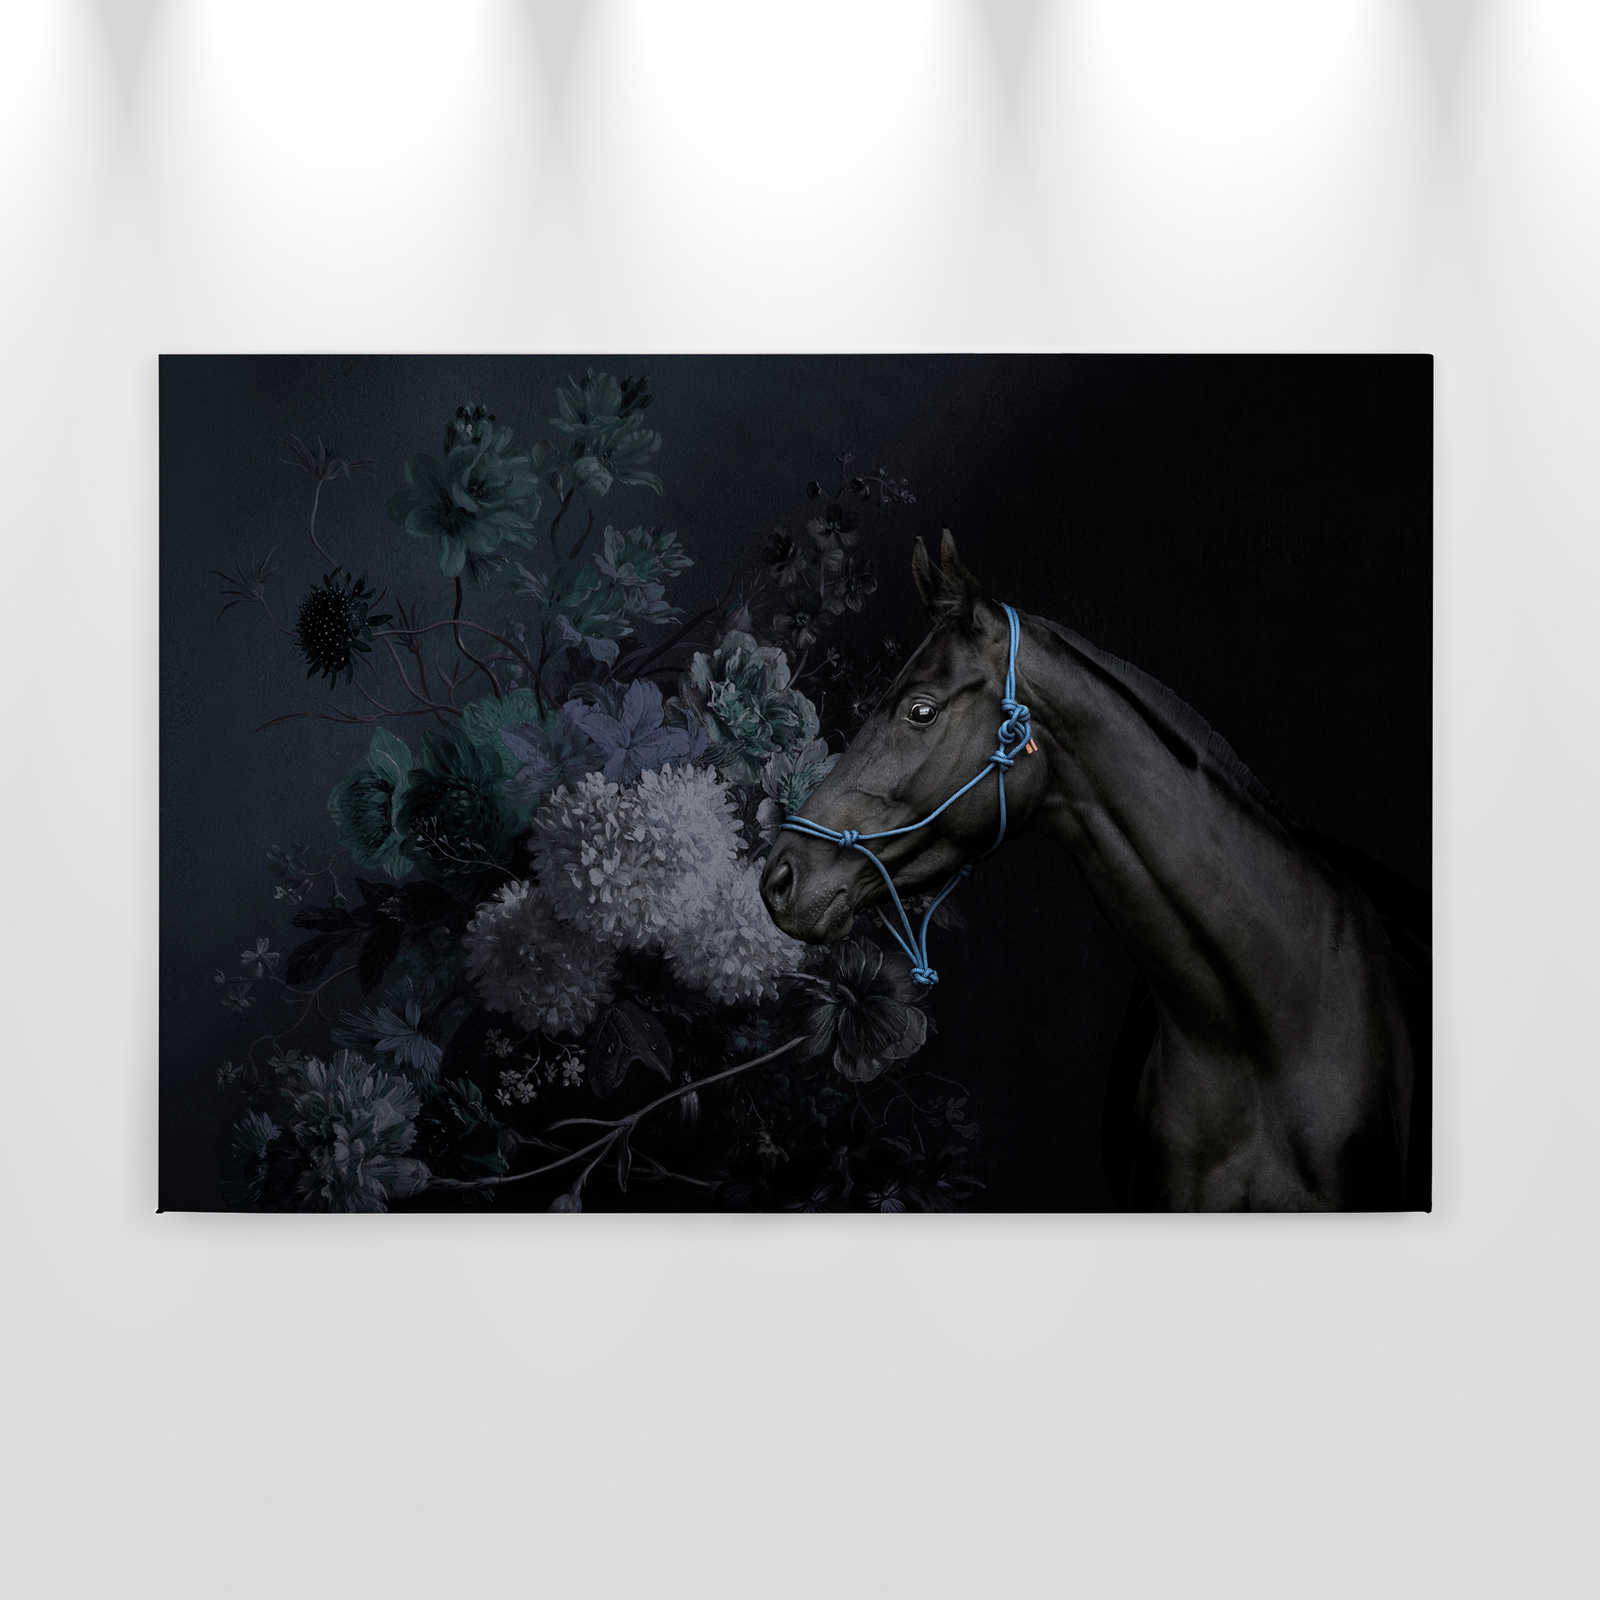             Horses Portrait Style Canvas Painting with Flowers - 0.90 m x 0.60 m
        